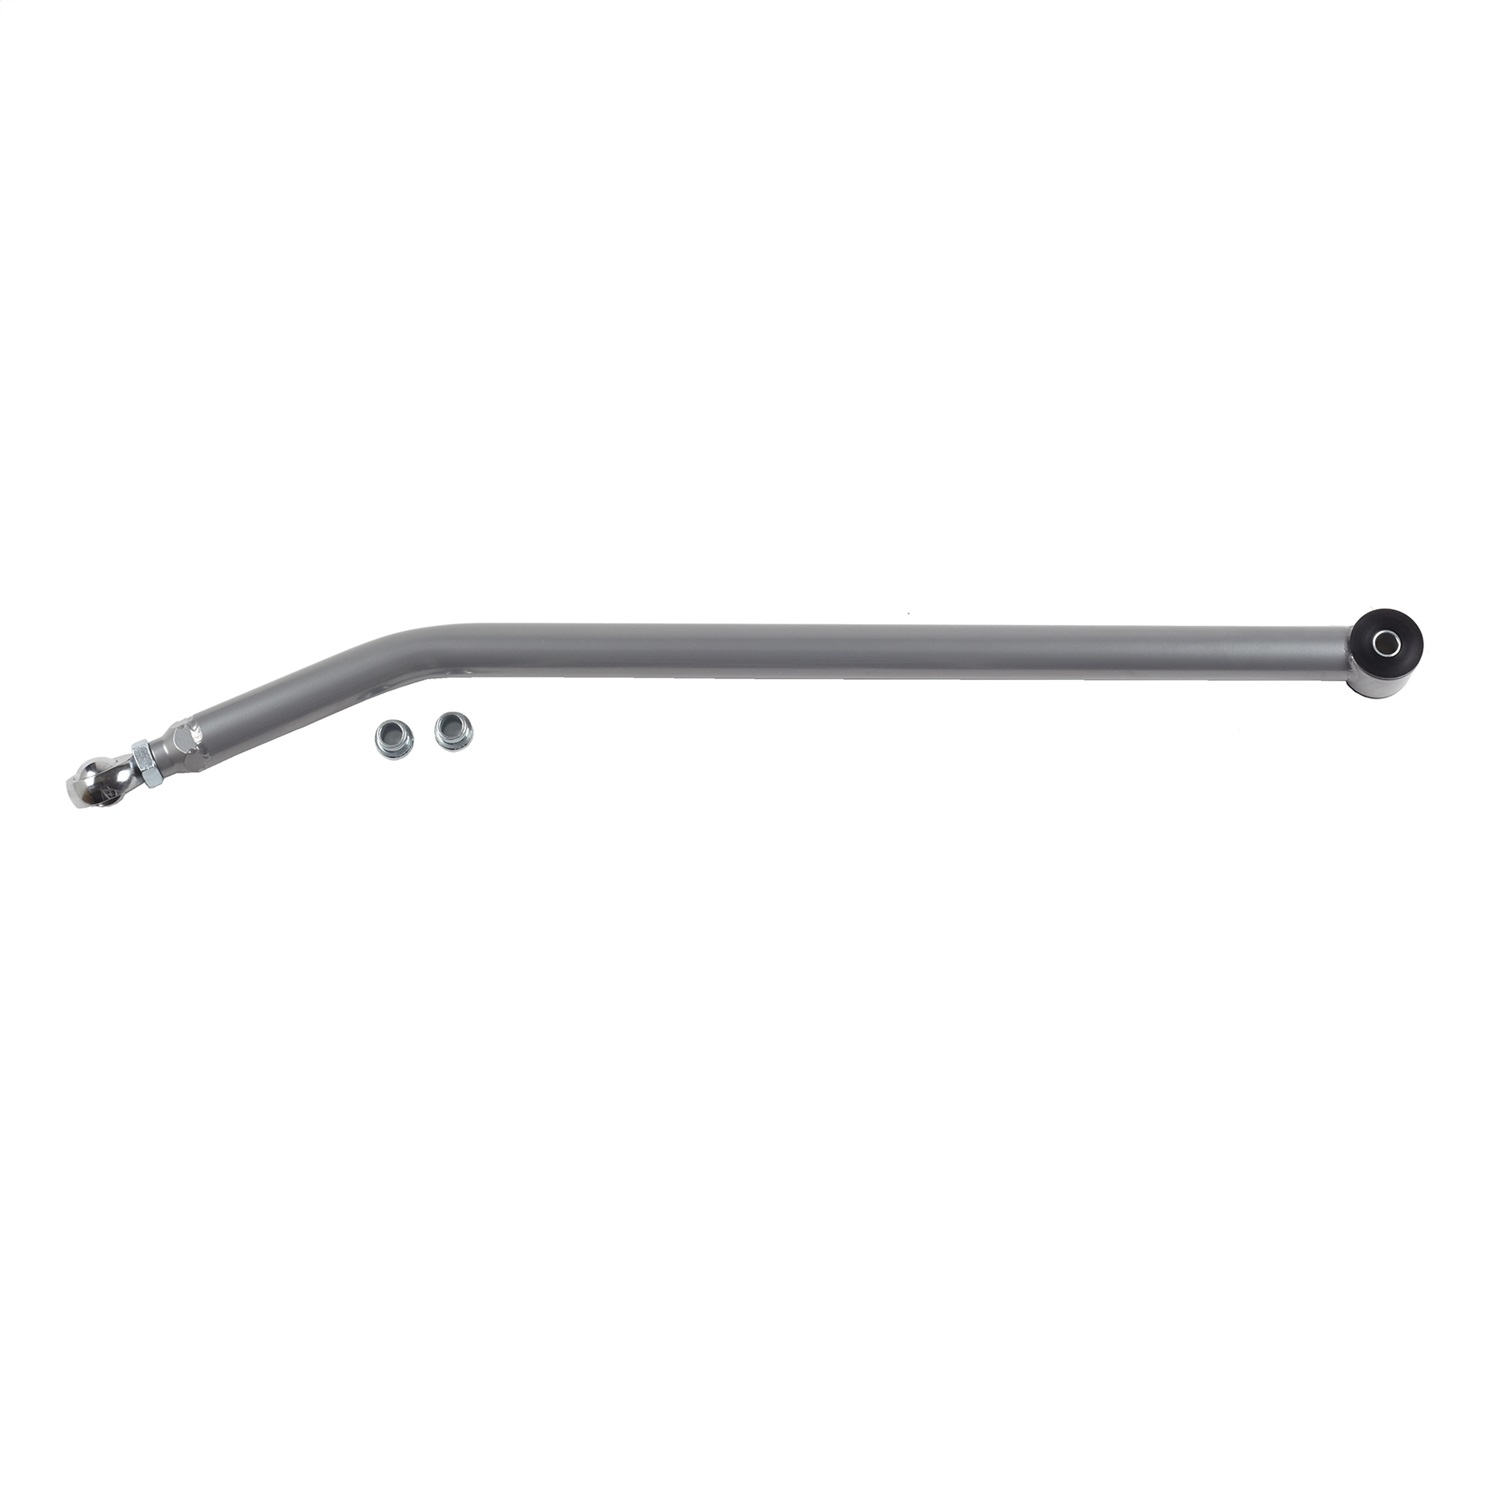 RE1673 Rubicon Express Track Bar For Use With 3-1/2 Inch Lift